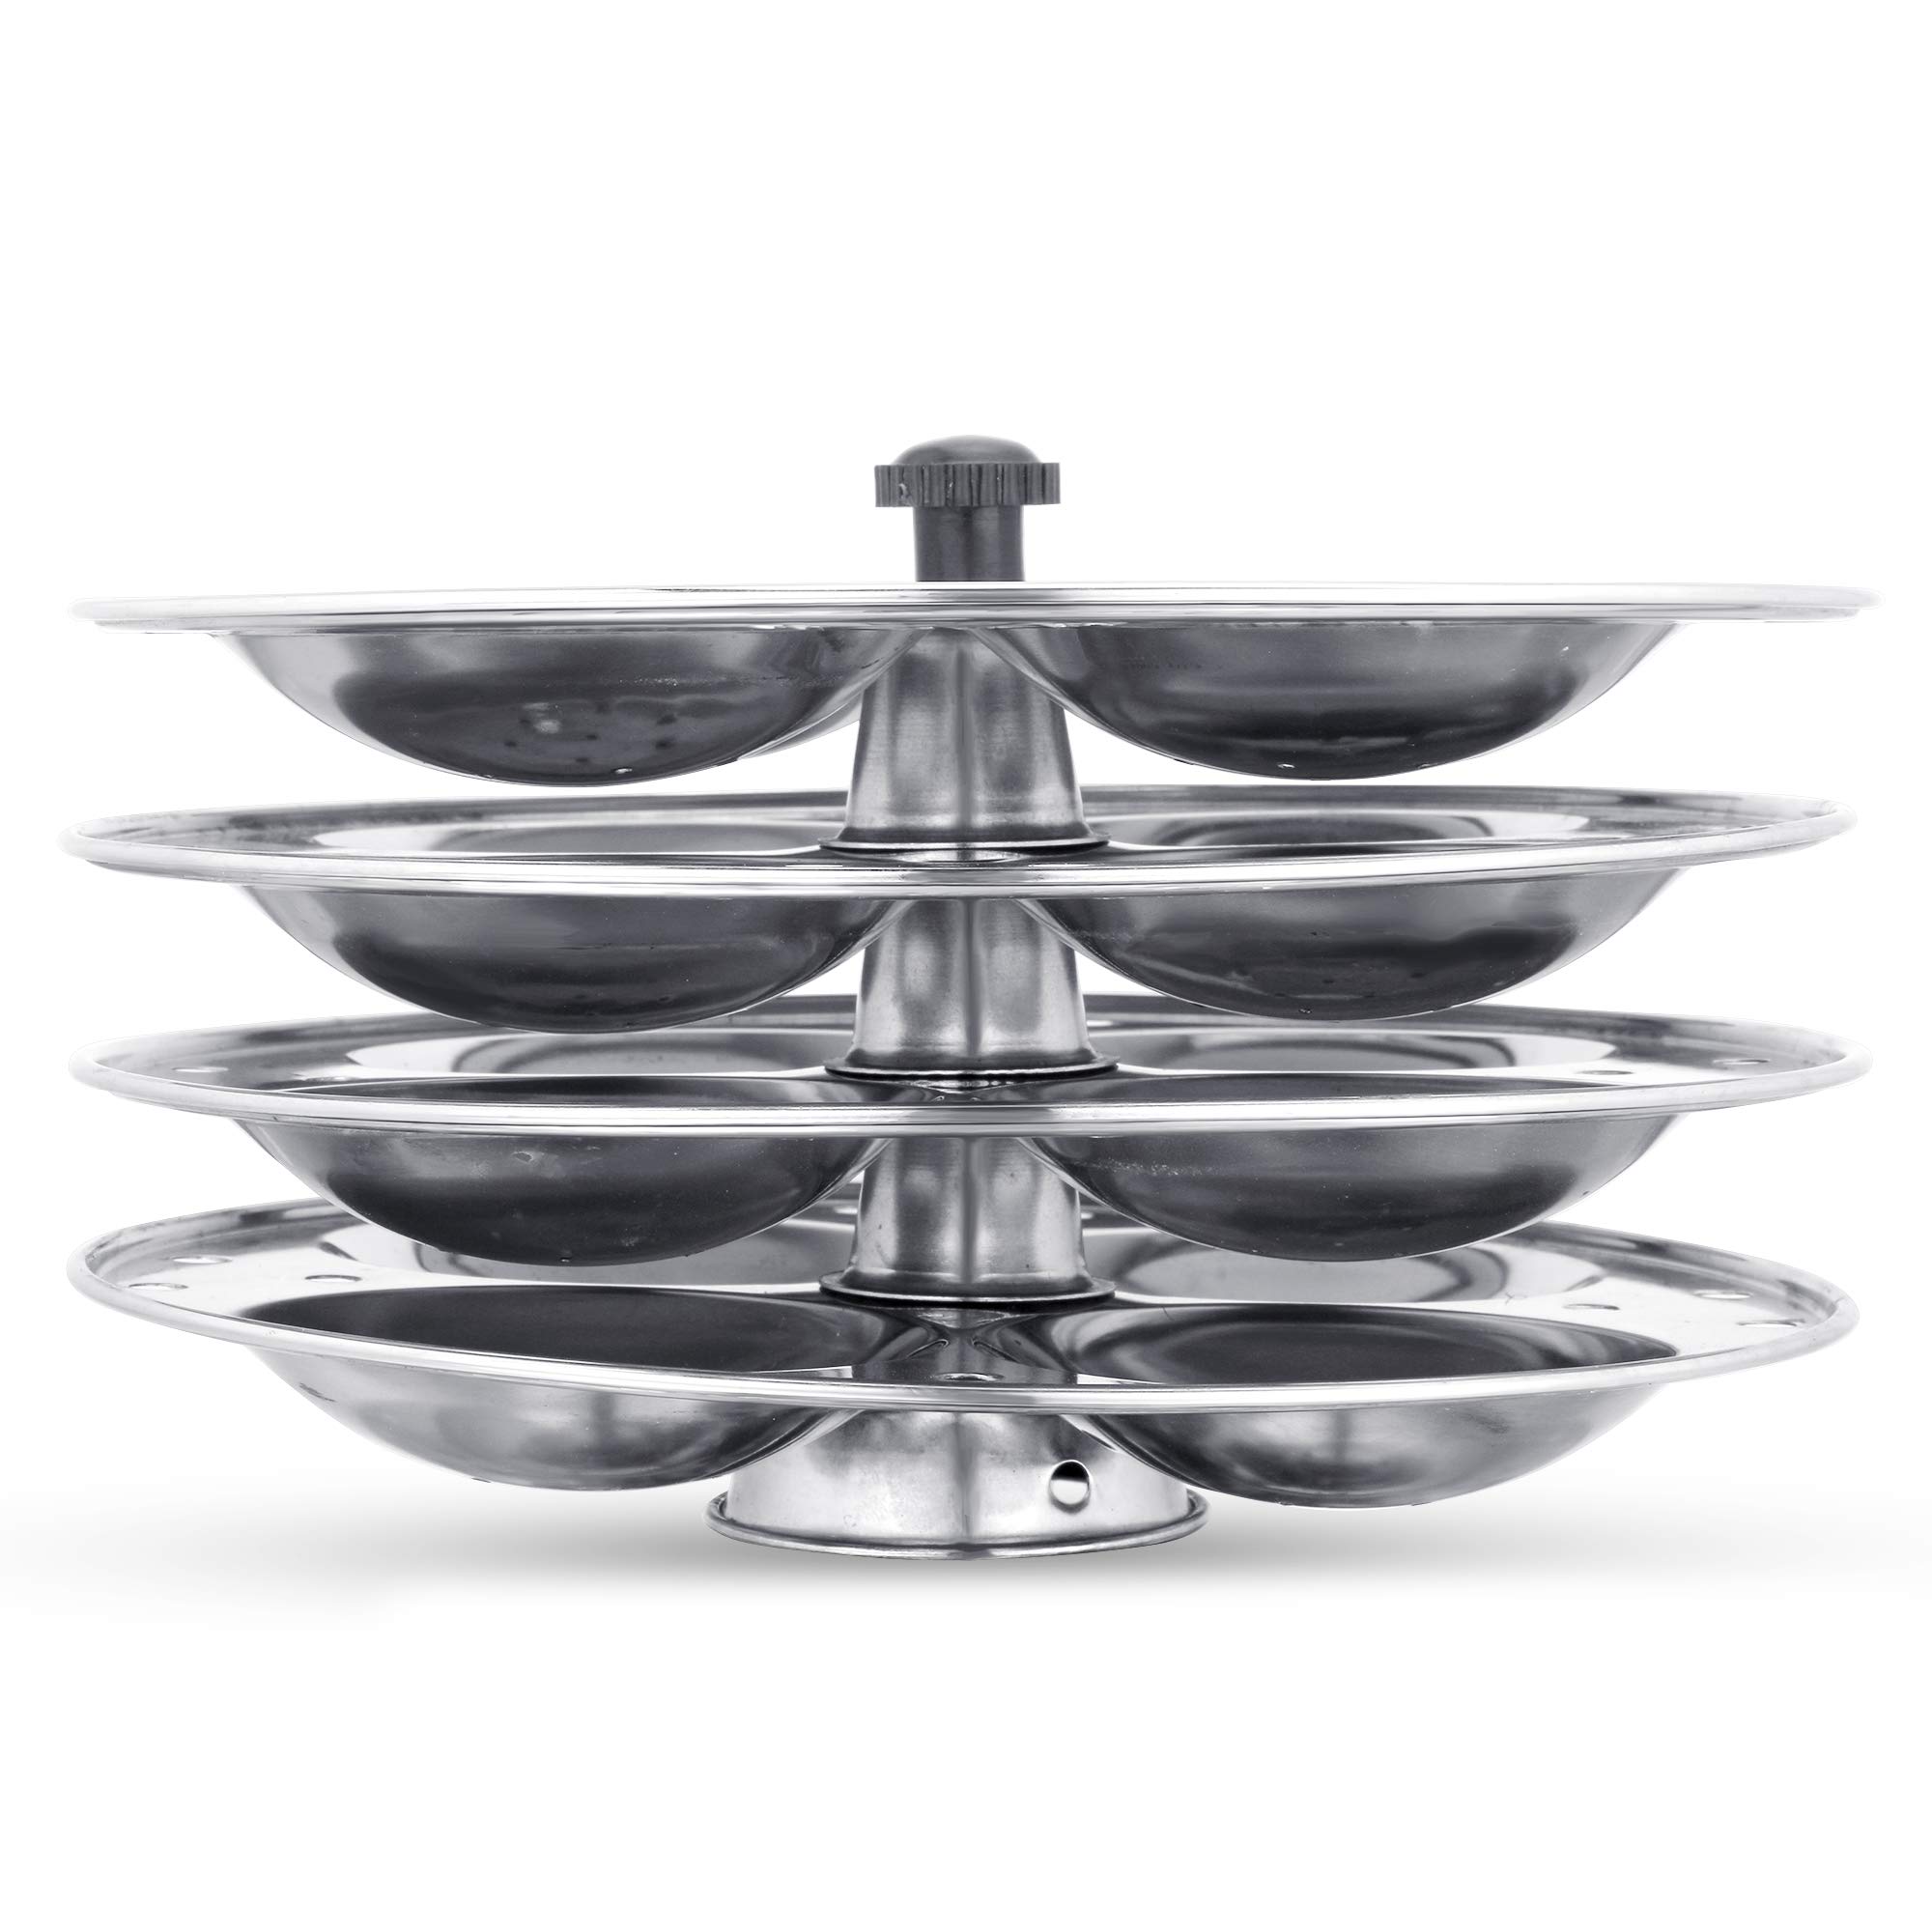 Vinod Professional Idli Stand – 4 Tier Stand – Makes up to 16 Idlis – Easy Cleaning – Stainless Steel Body - Suitable For Indian Cooking – Food Grade Idli Plates For Cooker, Electric Pot, Insta Pot